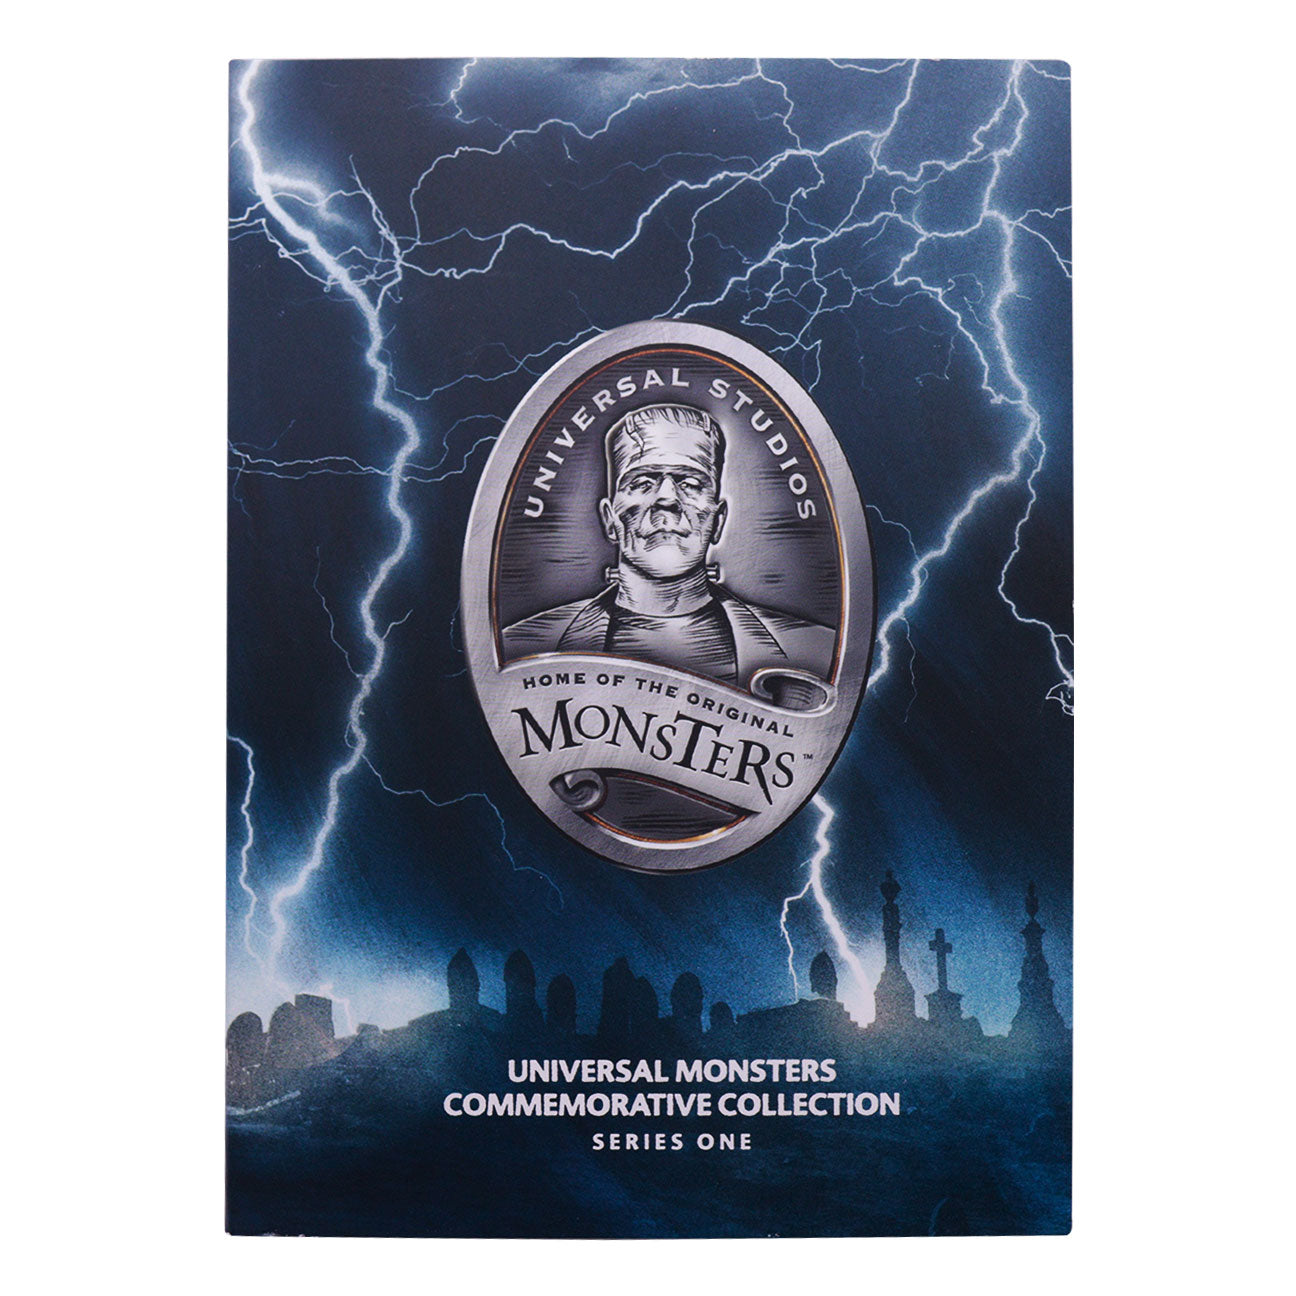 Universal Monsters Limited Edition Coin Album